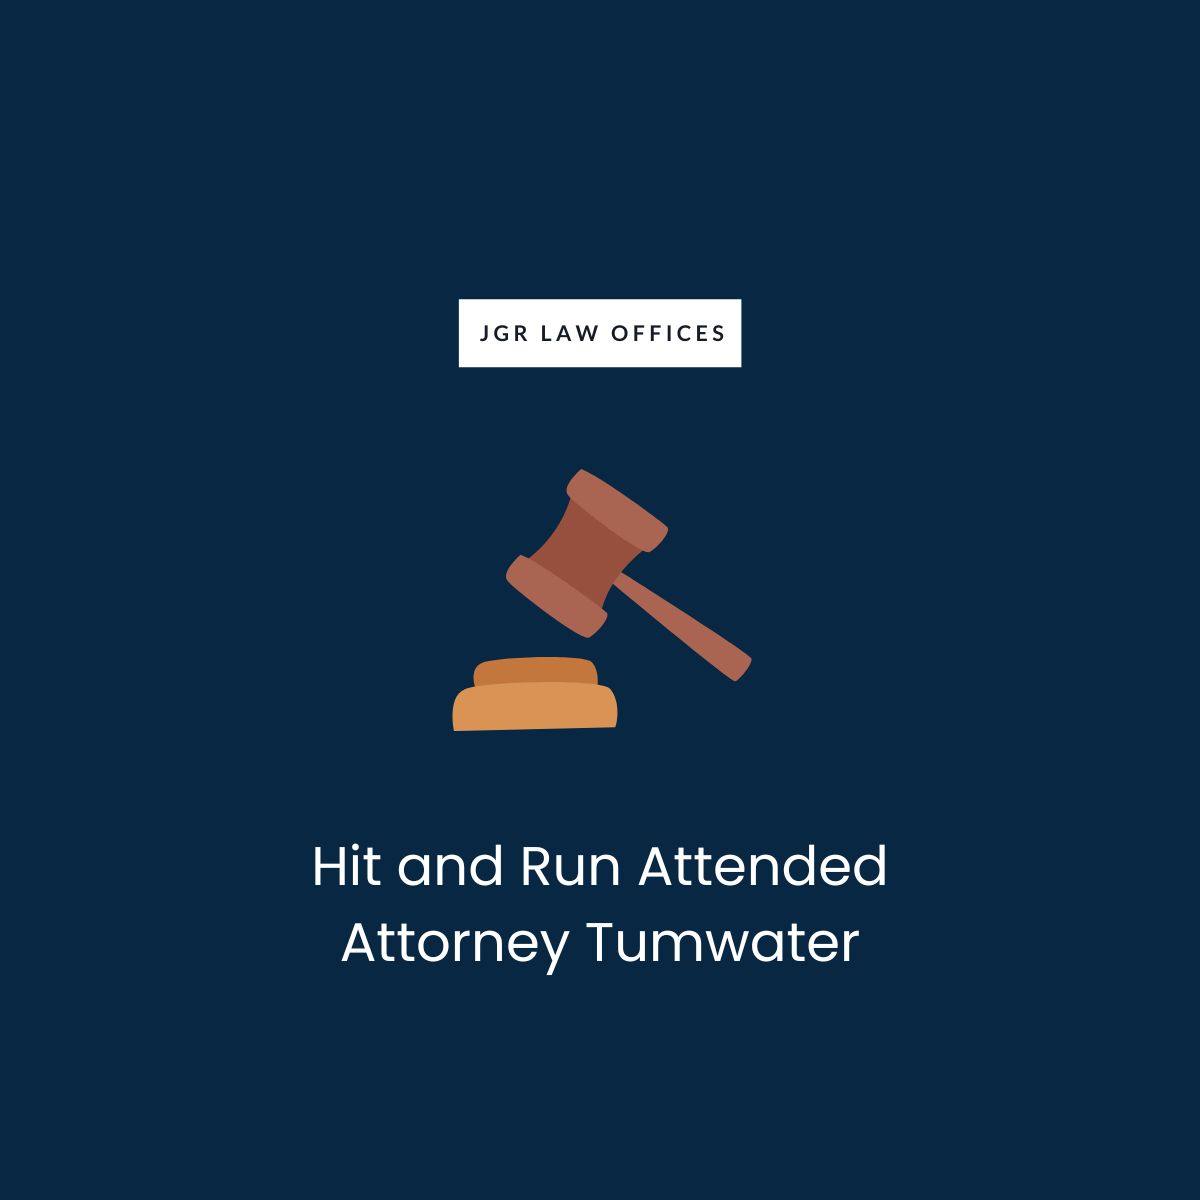 Hit and Run Attended Attorney Tumwater